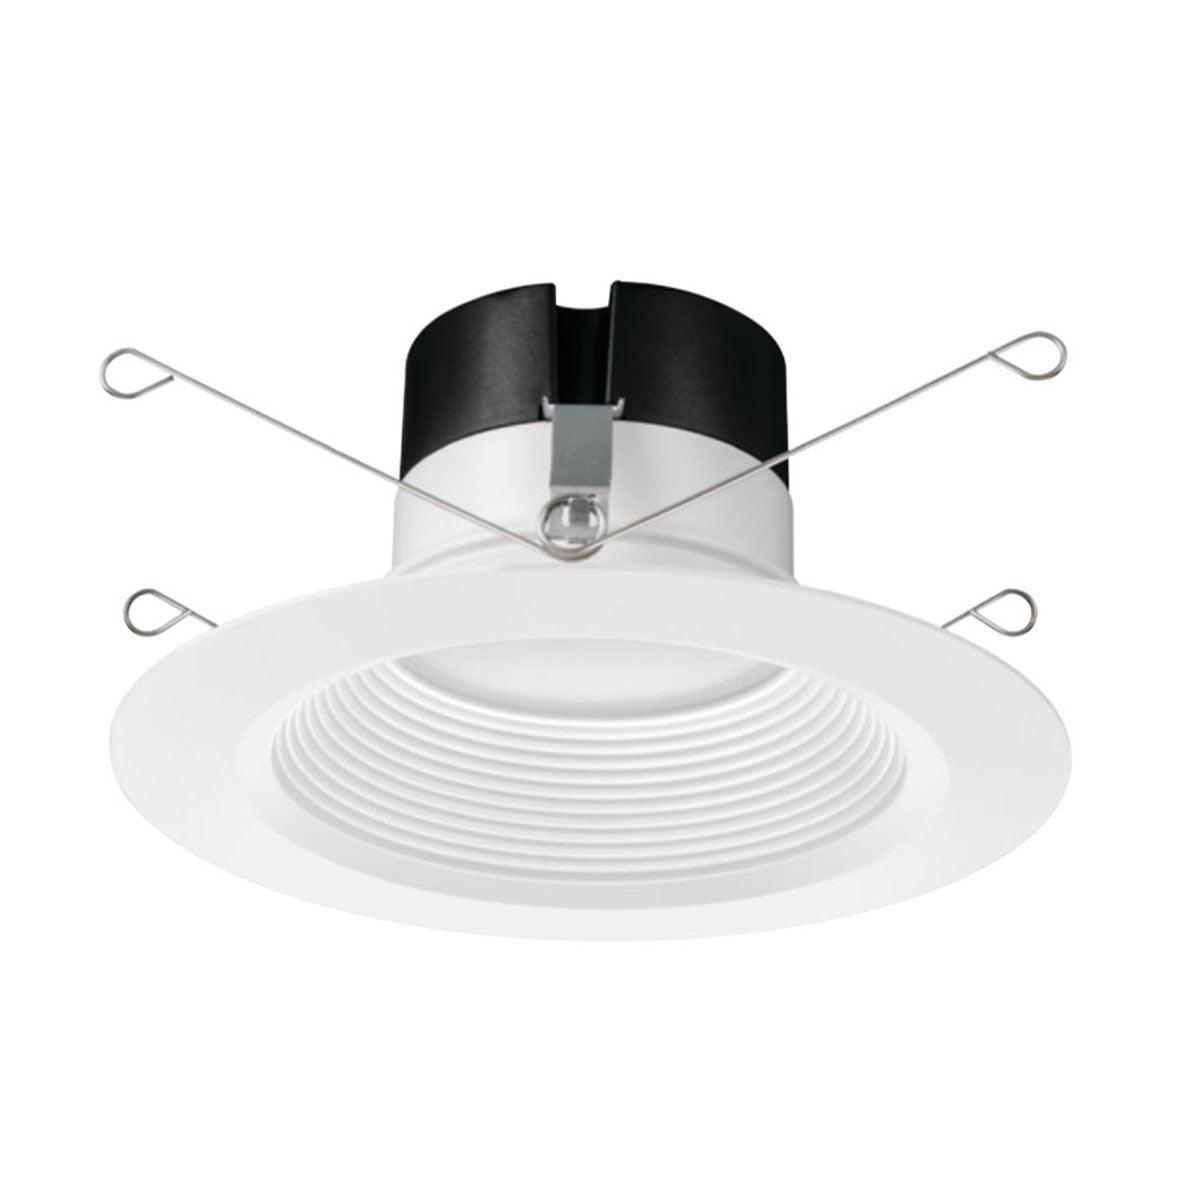 6 Inch Recessed LED Can Light, Round, 10 Watt, 900 Lumens, Selectable CCT, 2700K to 5000K, Baffle Trim - Bees Lighting